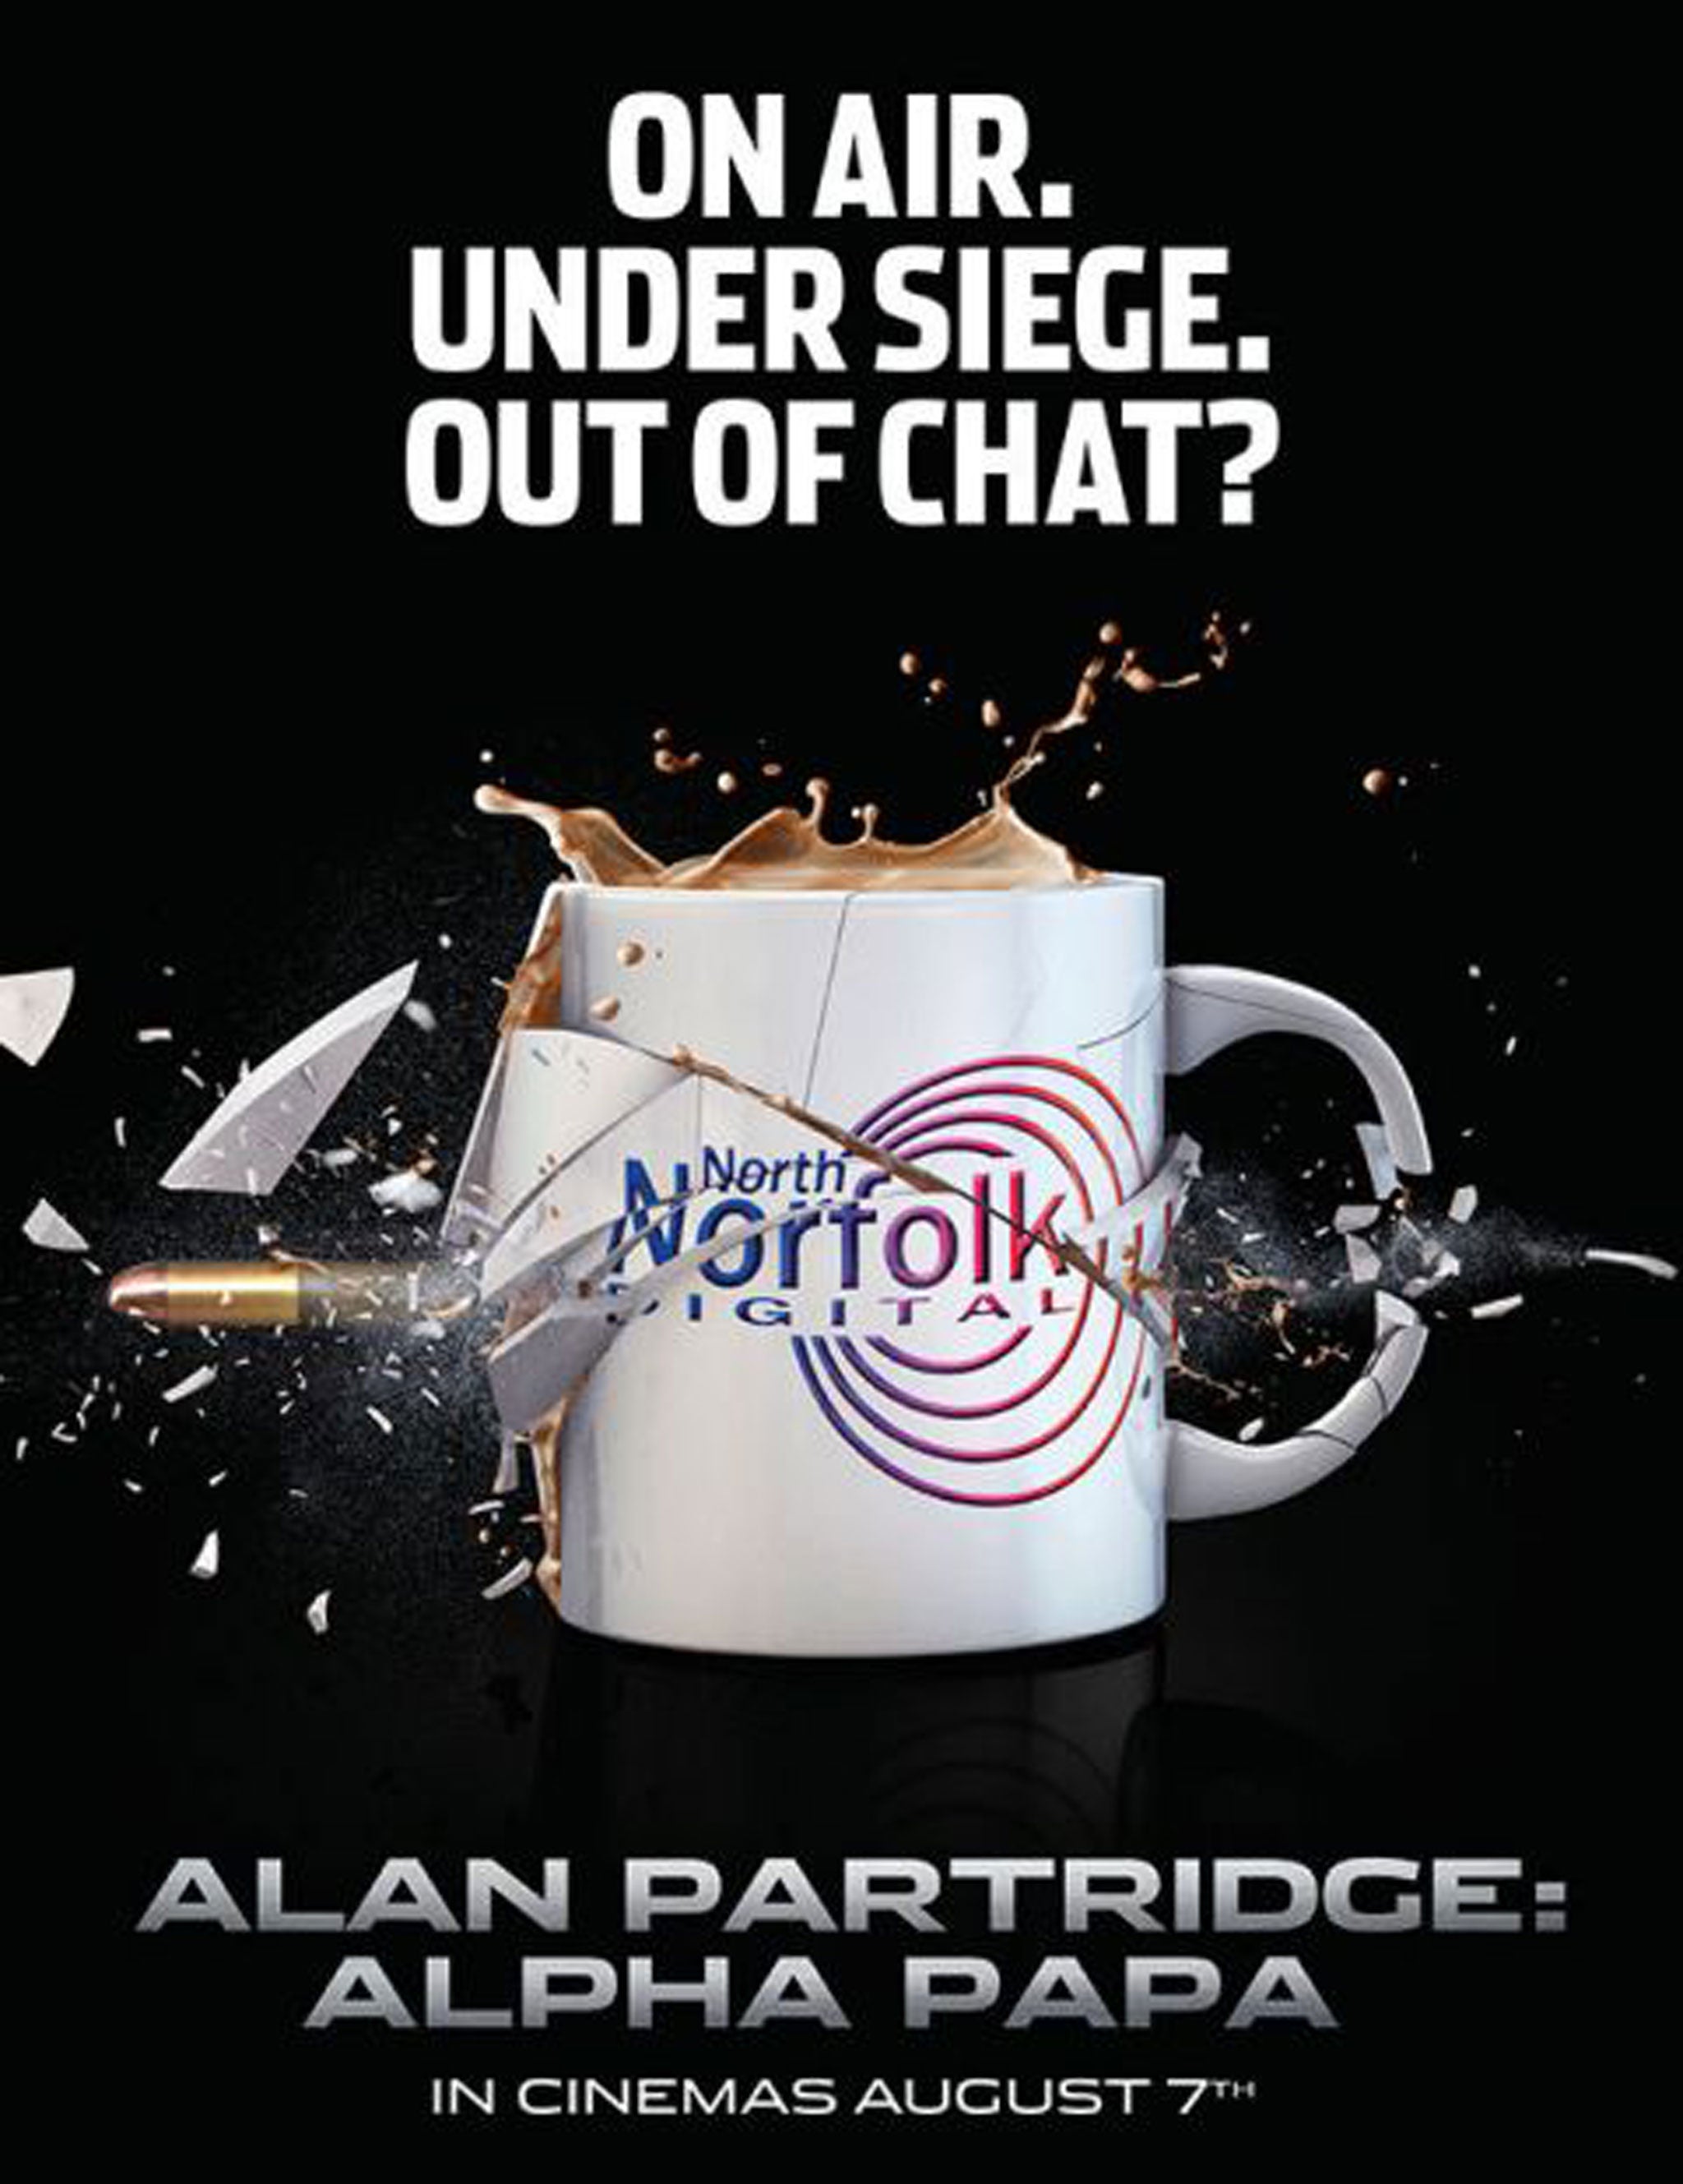 The poster for Alan Partridge: Alpha Papa